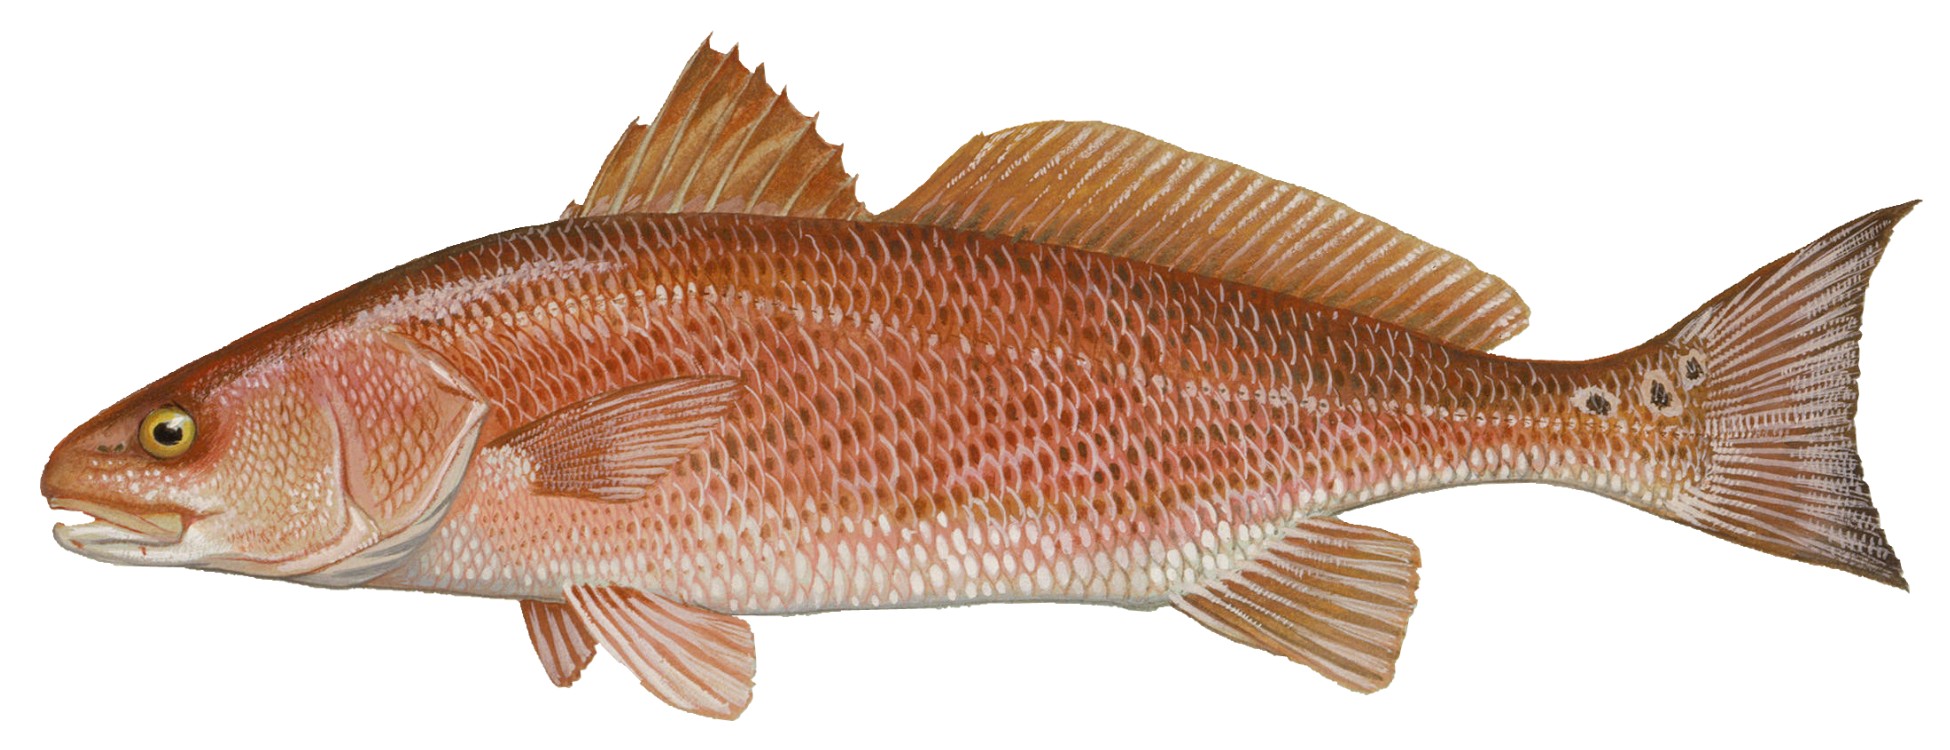 Red drum rendering. Image by Duane Raver / U.S. Fish and Wildlife Service.